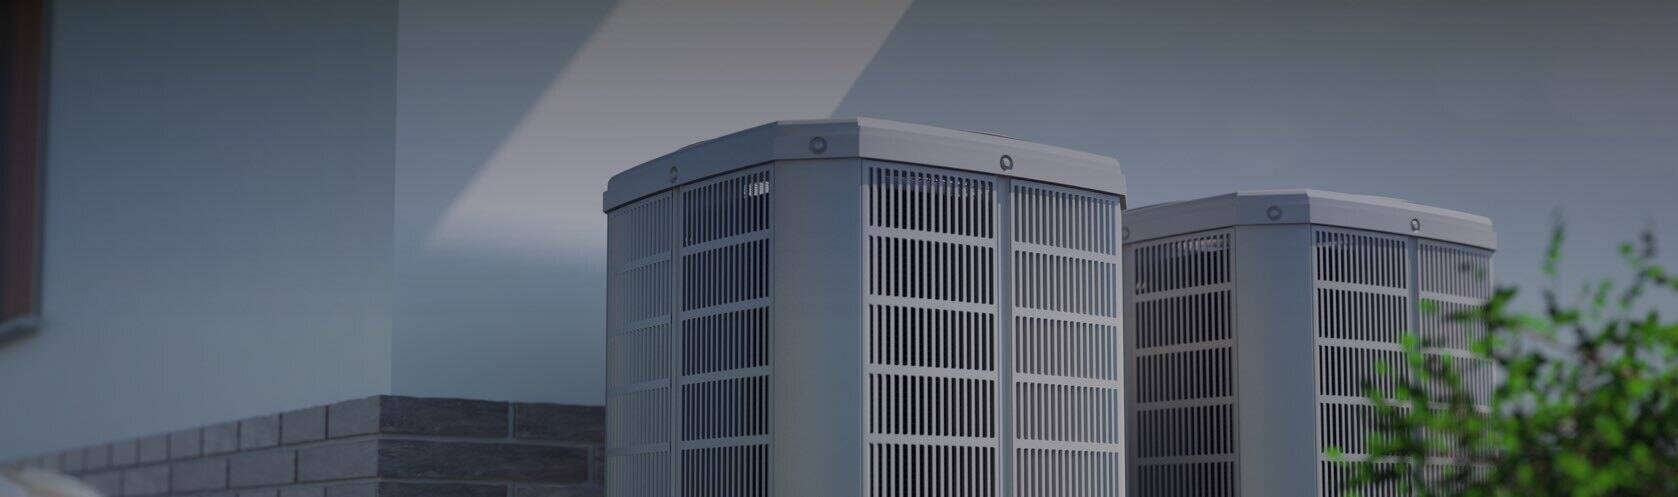 Top-rated heating & air conditioning/hvac work.